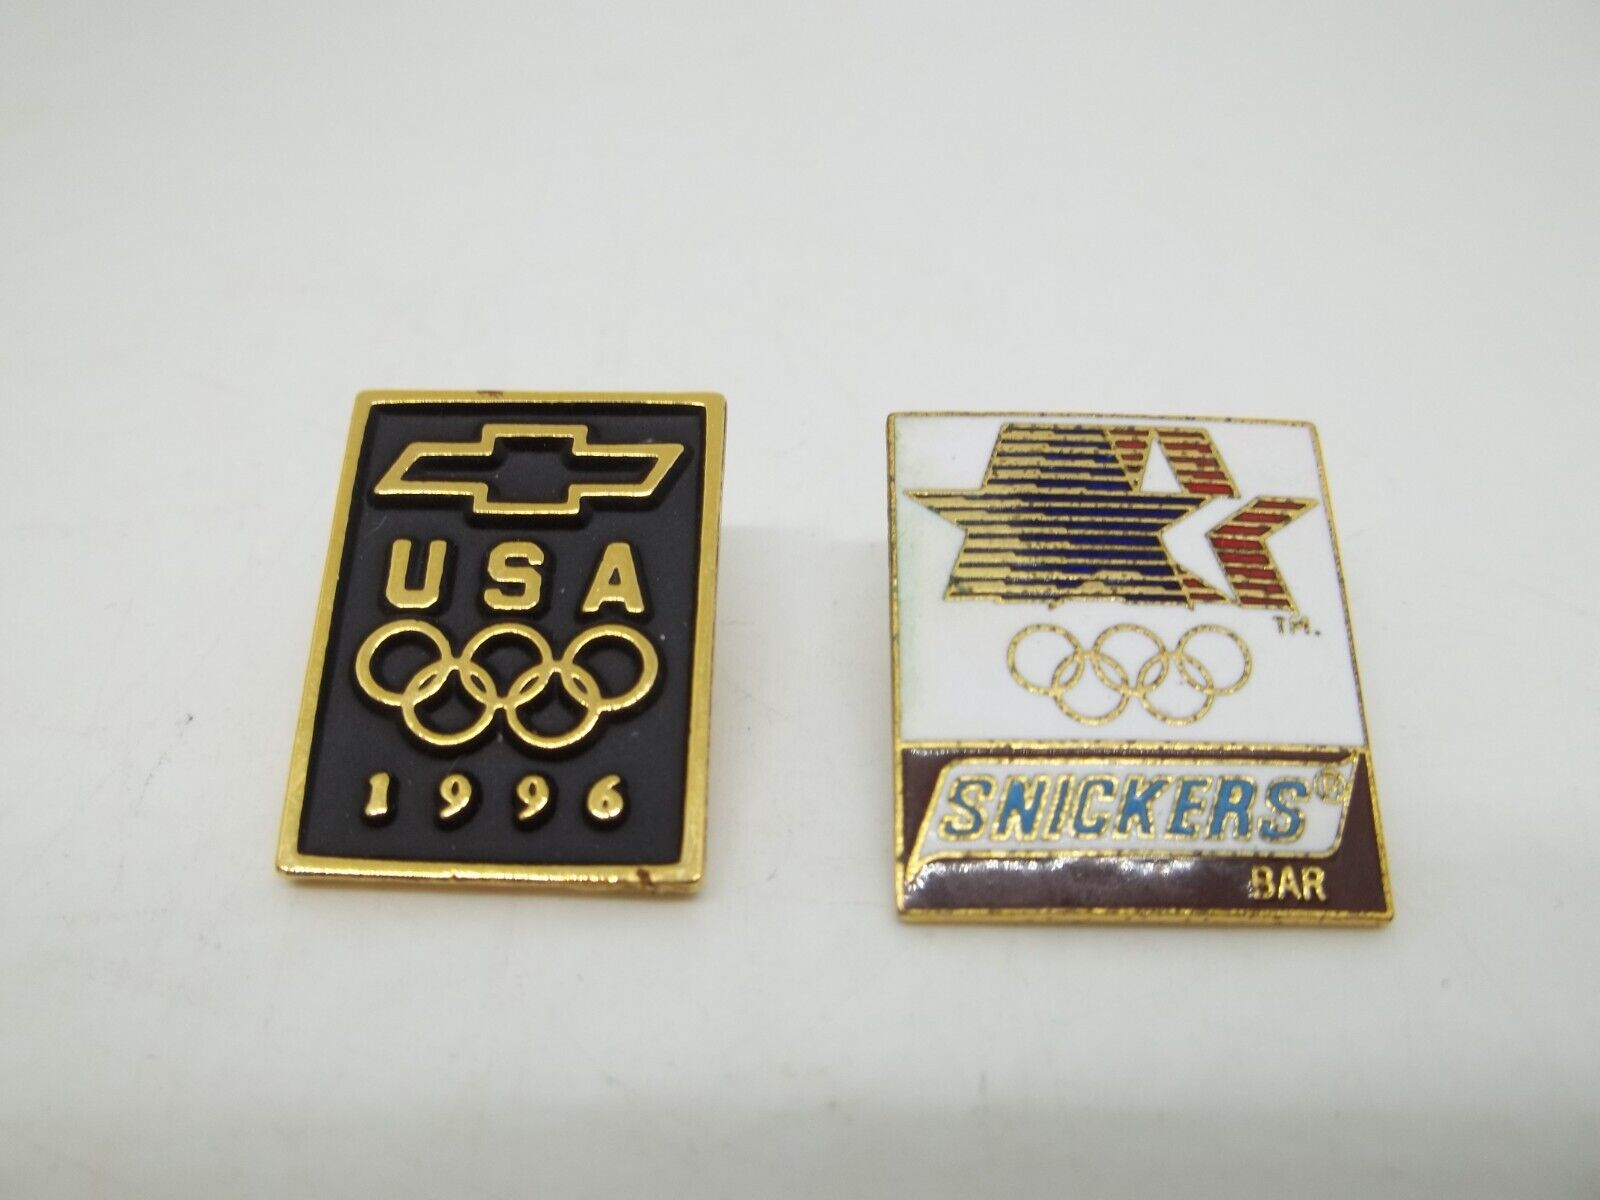 1996 Chevrolet 1980 Snickers Olympic Lapel Pin Tie Tack Hat Pin